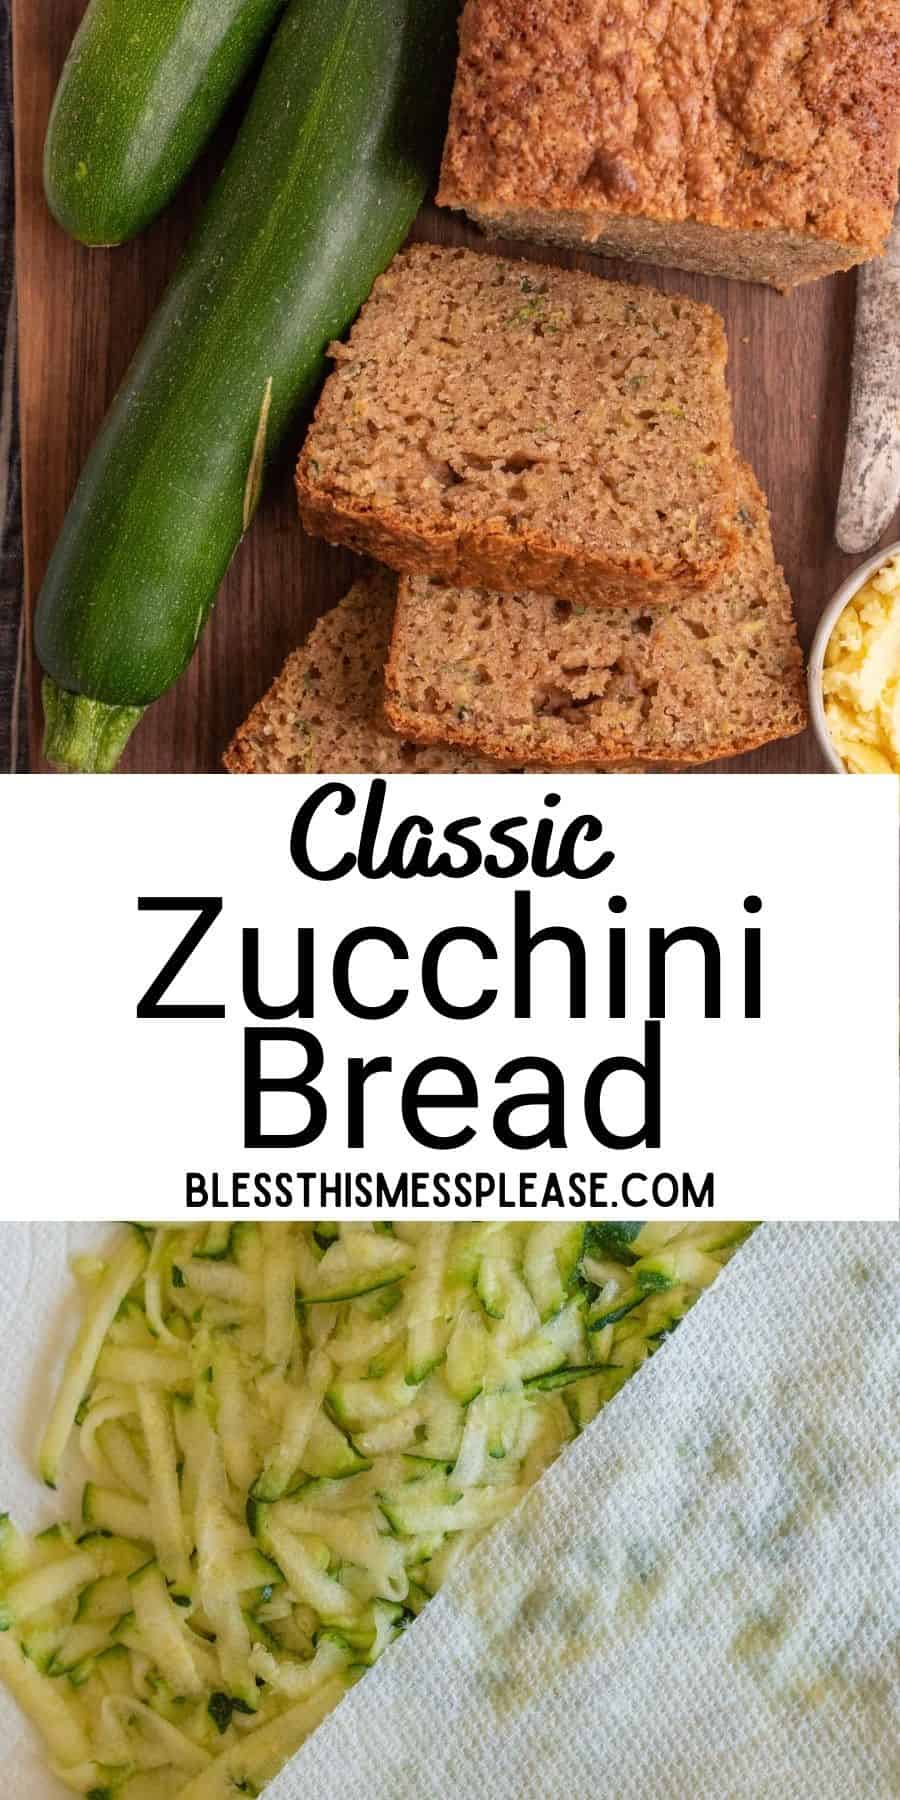 top picture is the top view of sliced zucchini bread next to zucchini, bottom picture is of shredded zucchini, with the words "classic zucchini bread" written in the middle